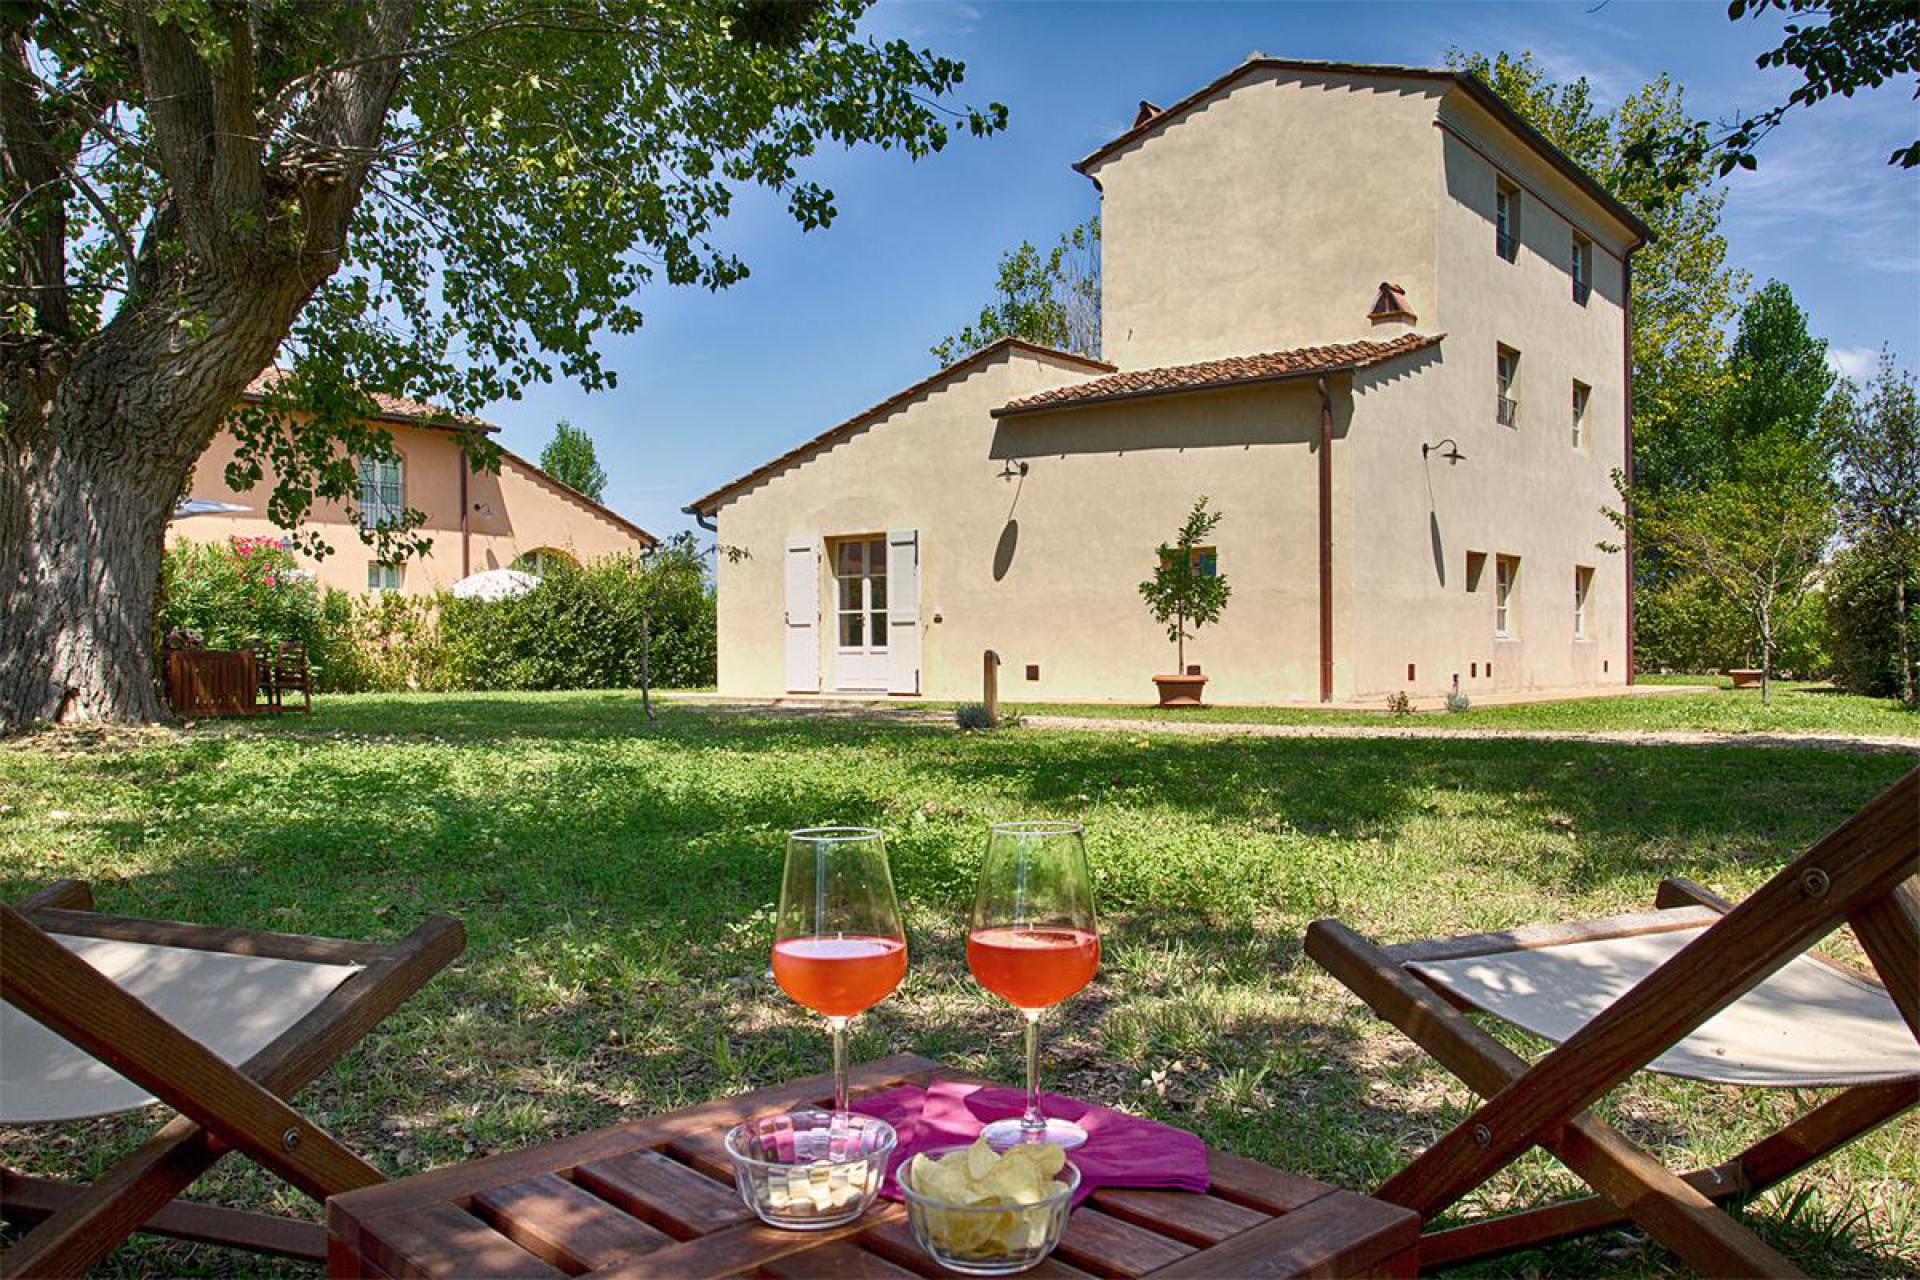 Child-friendly agriturismo only 10 minutes from the sea